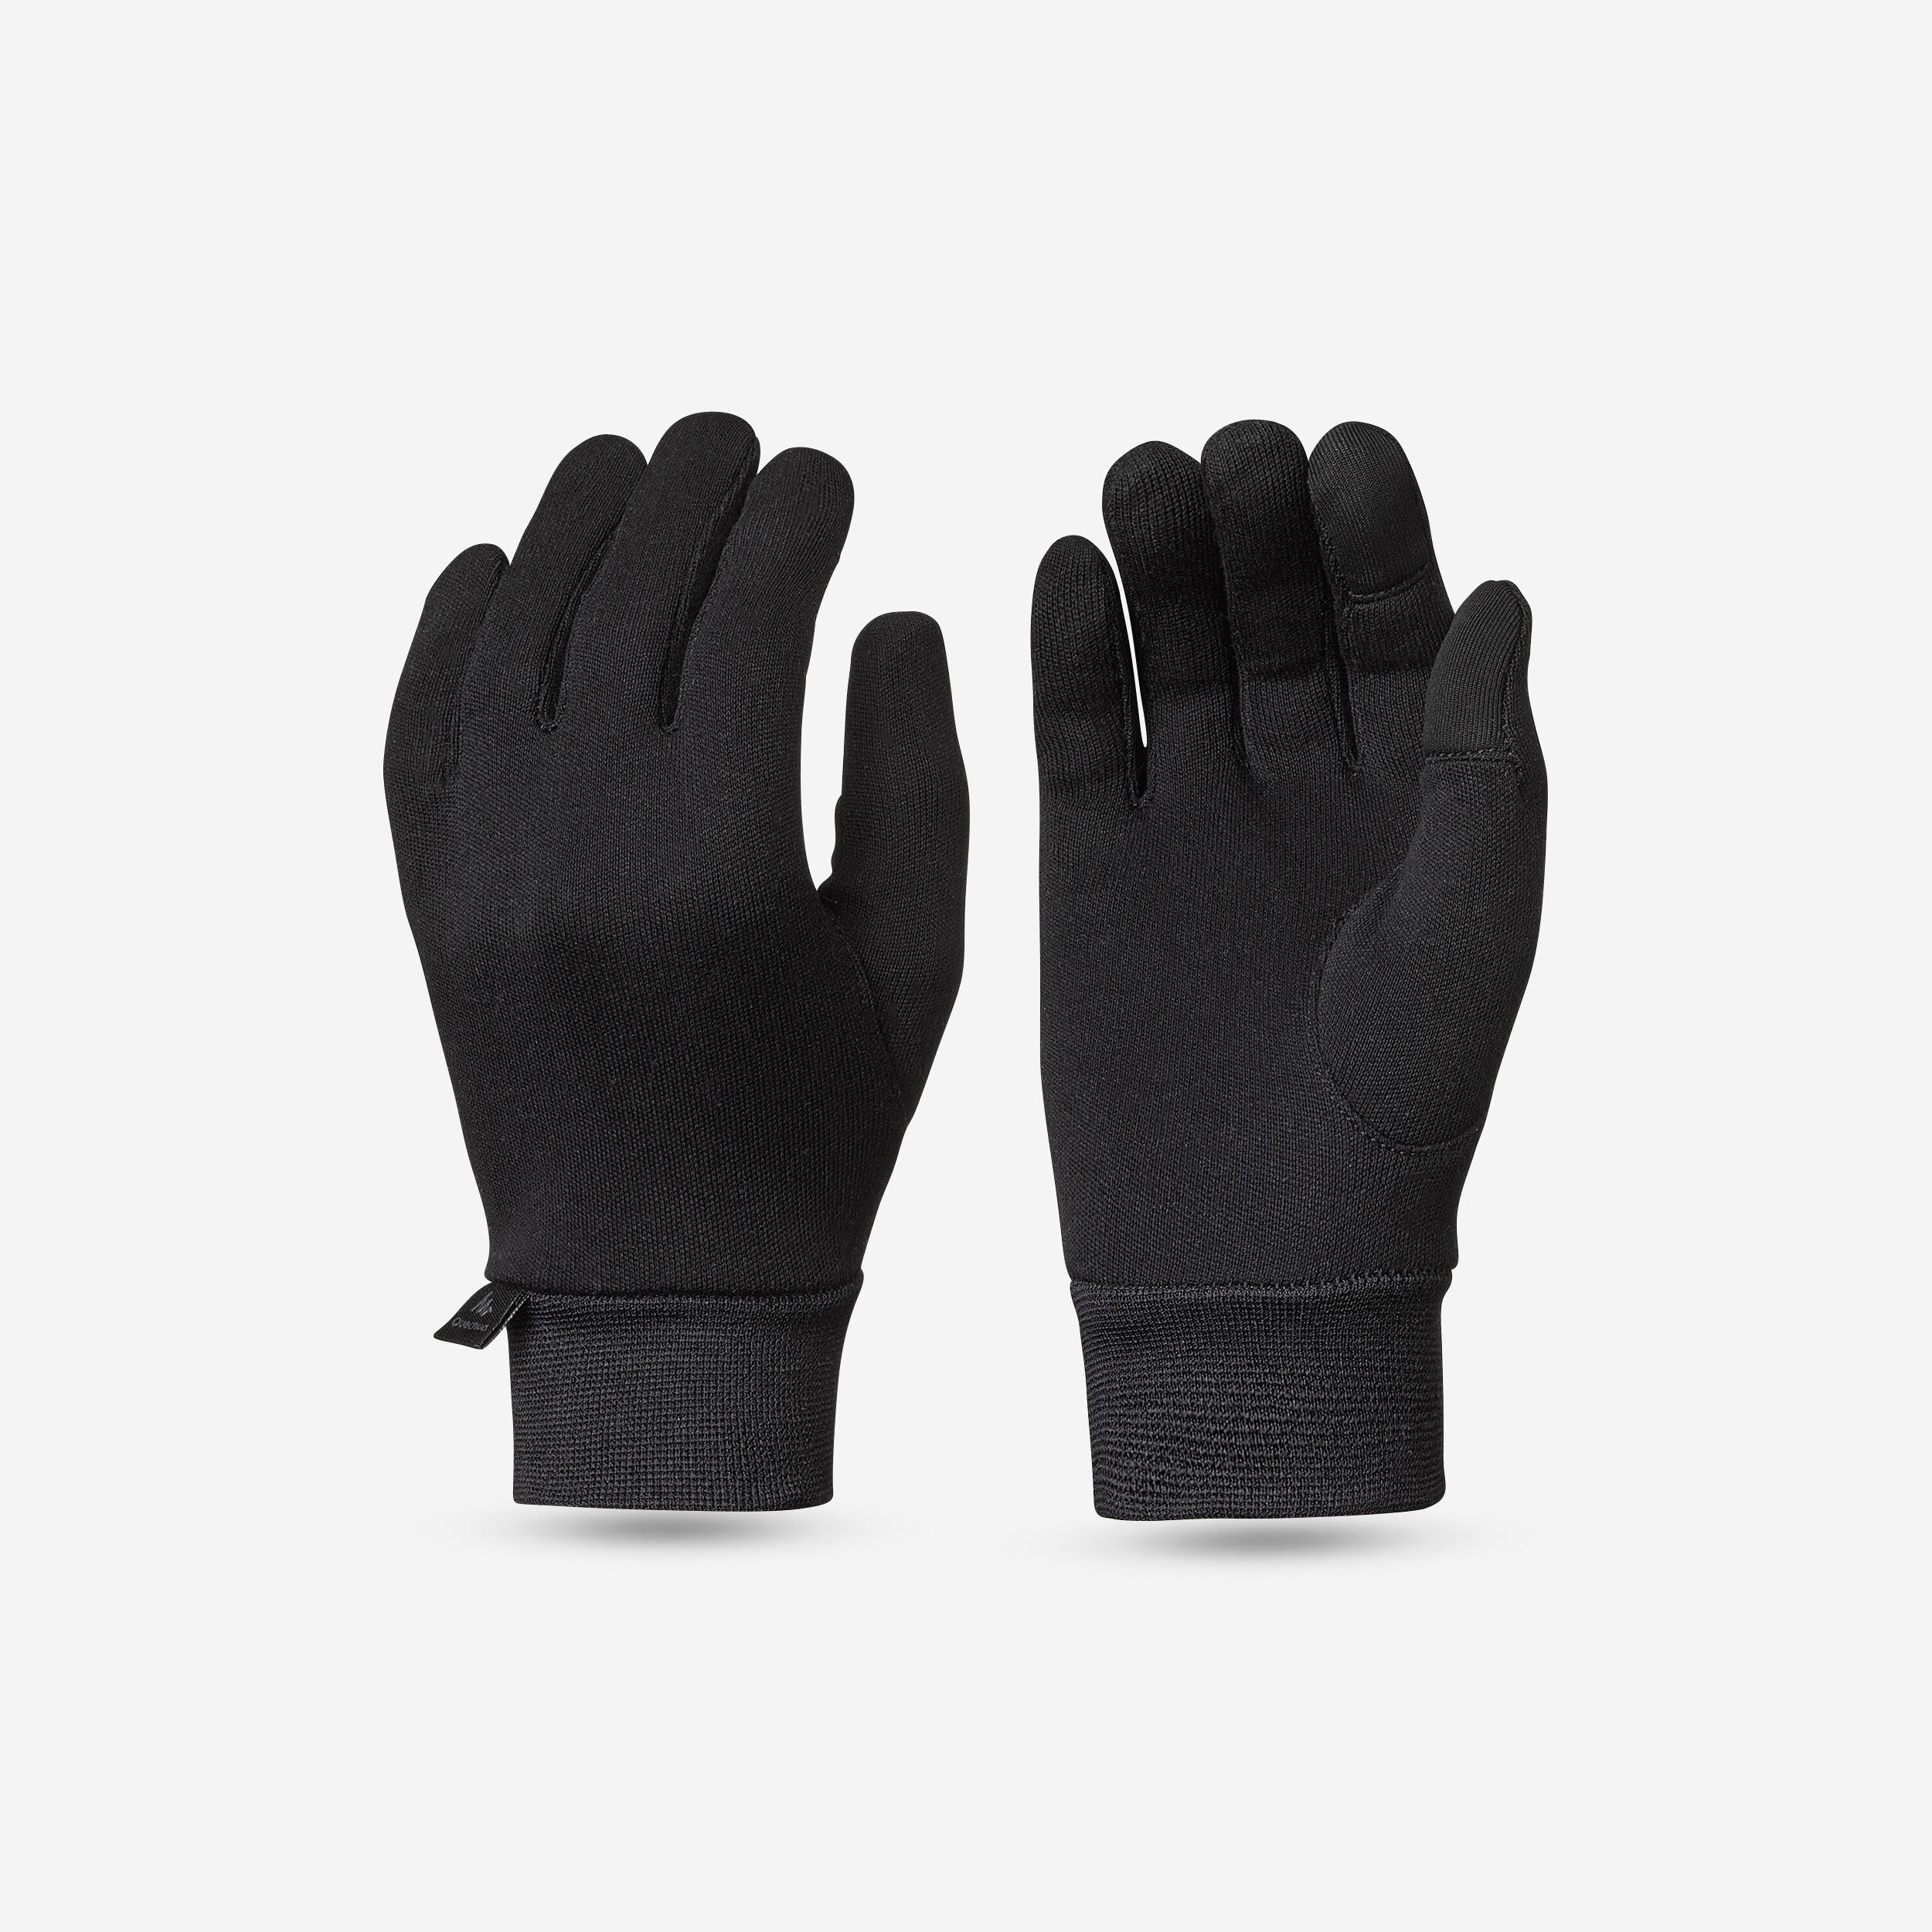 KIDS’ HIKING TOUCHSCREEN COMPATIBLE GLOVES - SH500 MOUNTAIN SILK - AGE 6-14  1/6